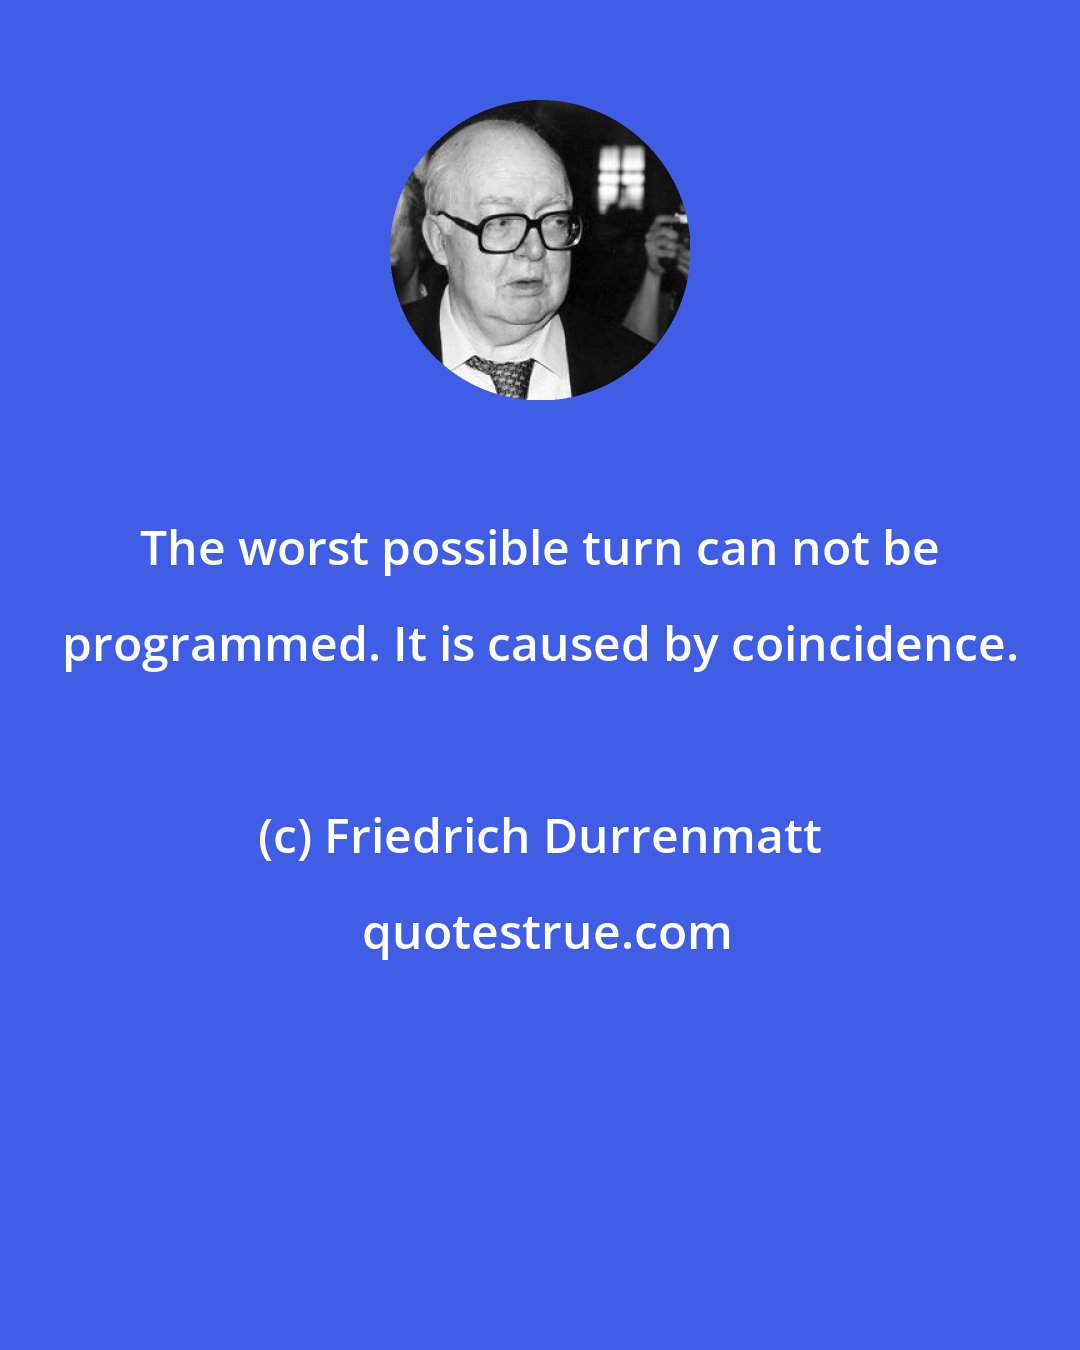 Friedrich Durrenmatt: The worst possible turn can not be programmed. It is caused by coincidence.